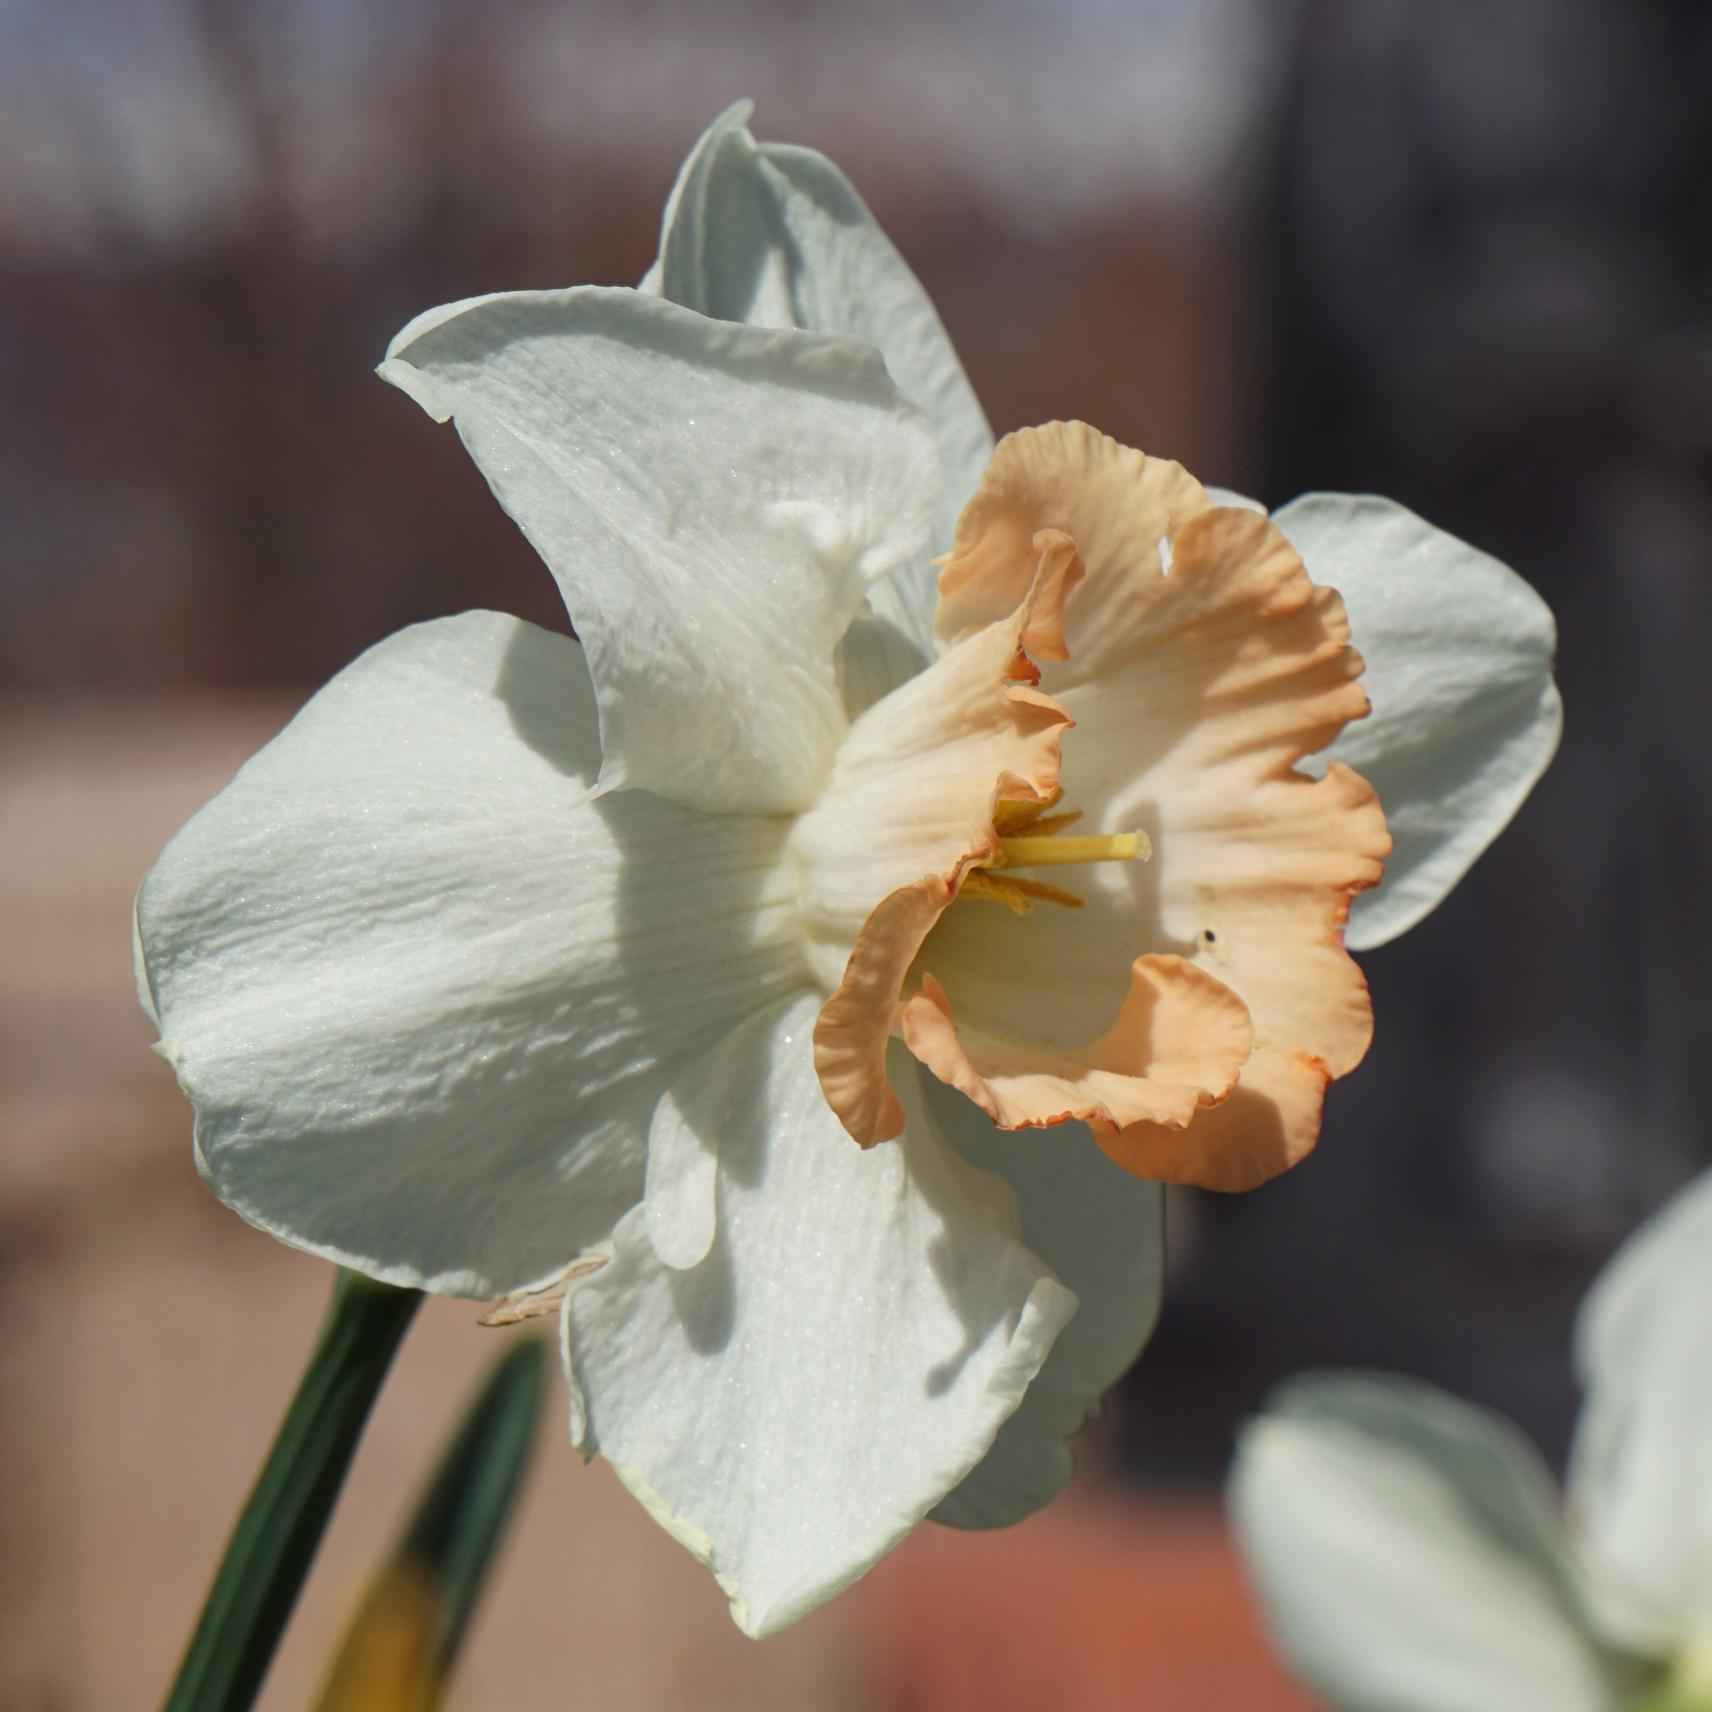 Daffodil Trumpet 'British Gamble' - Coming Soon for Fall 2022! from Leo Berbee Bulb Company